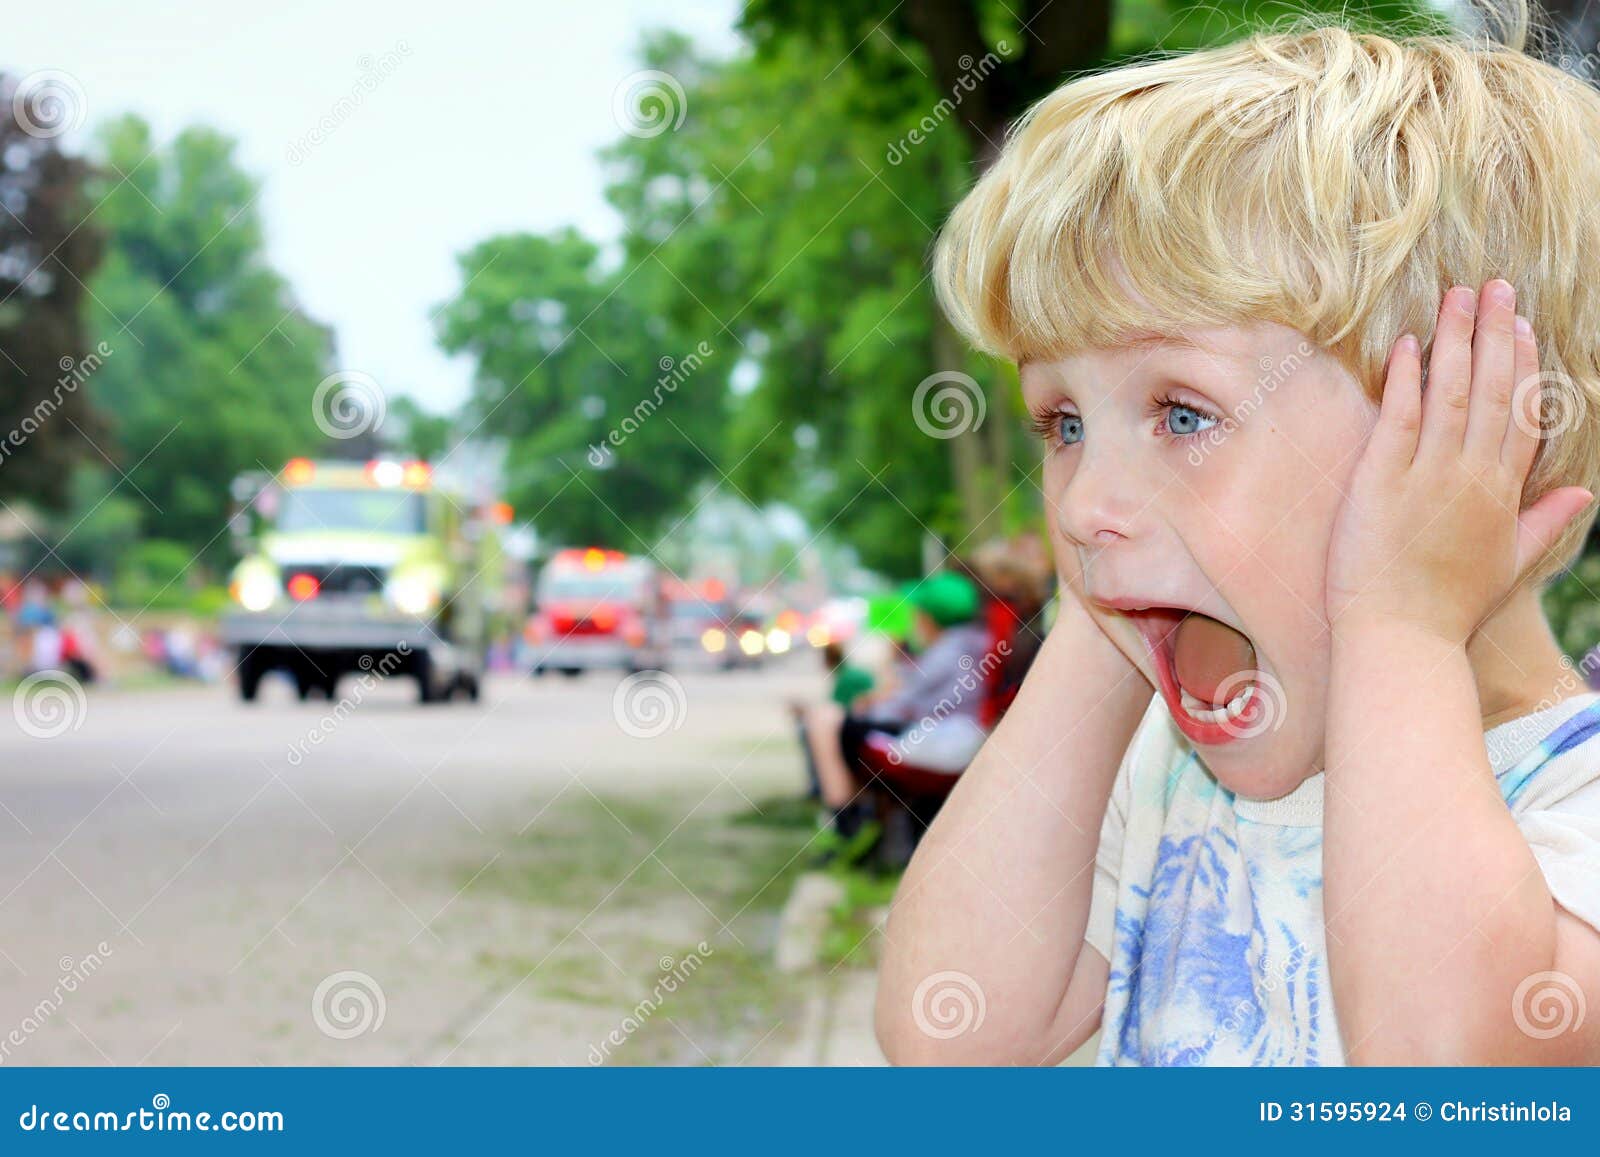 child covering ears at loud parade